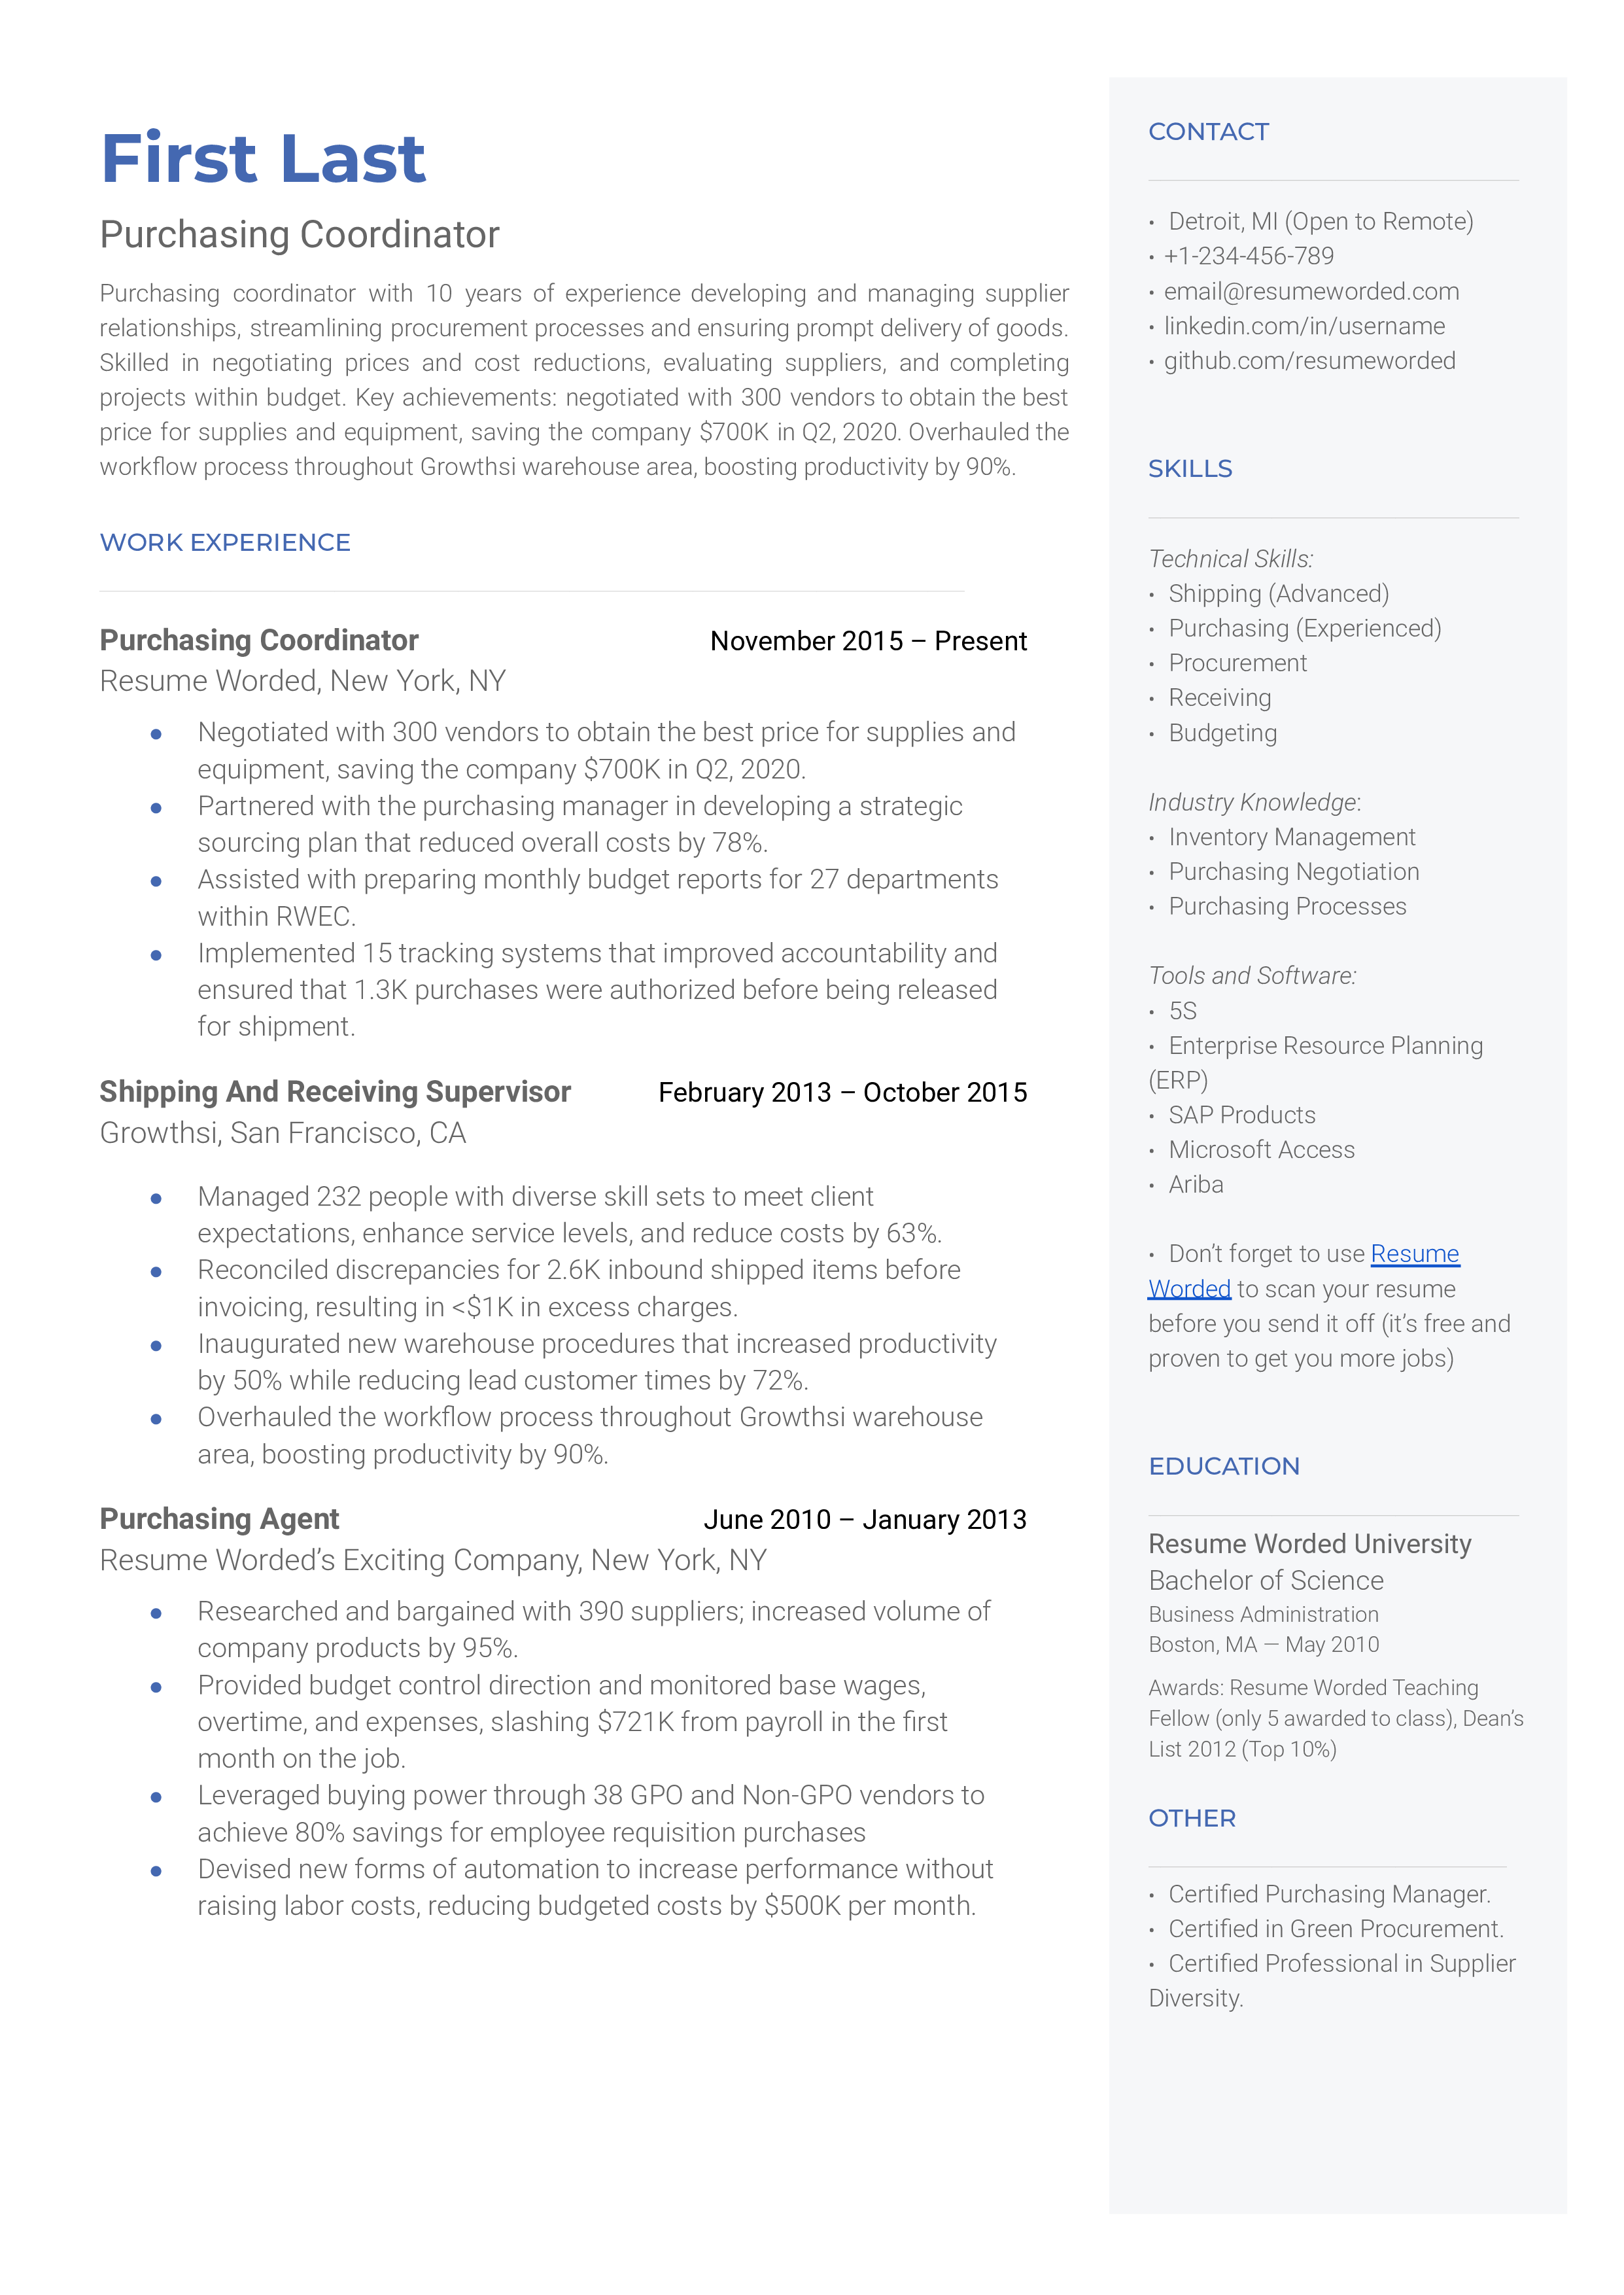 A purchasing coordinator resume template including a professional description, work experience, and additional information.